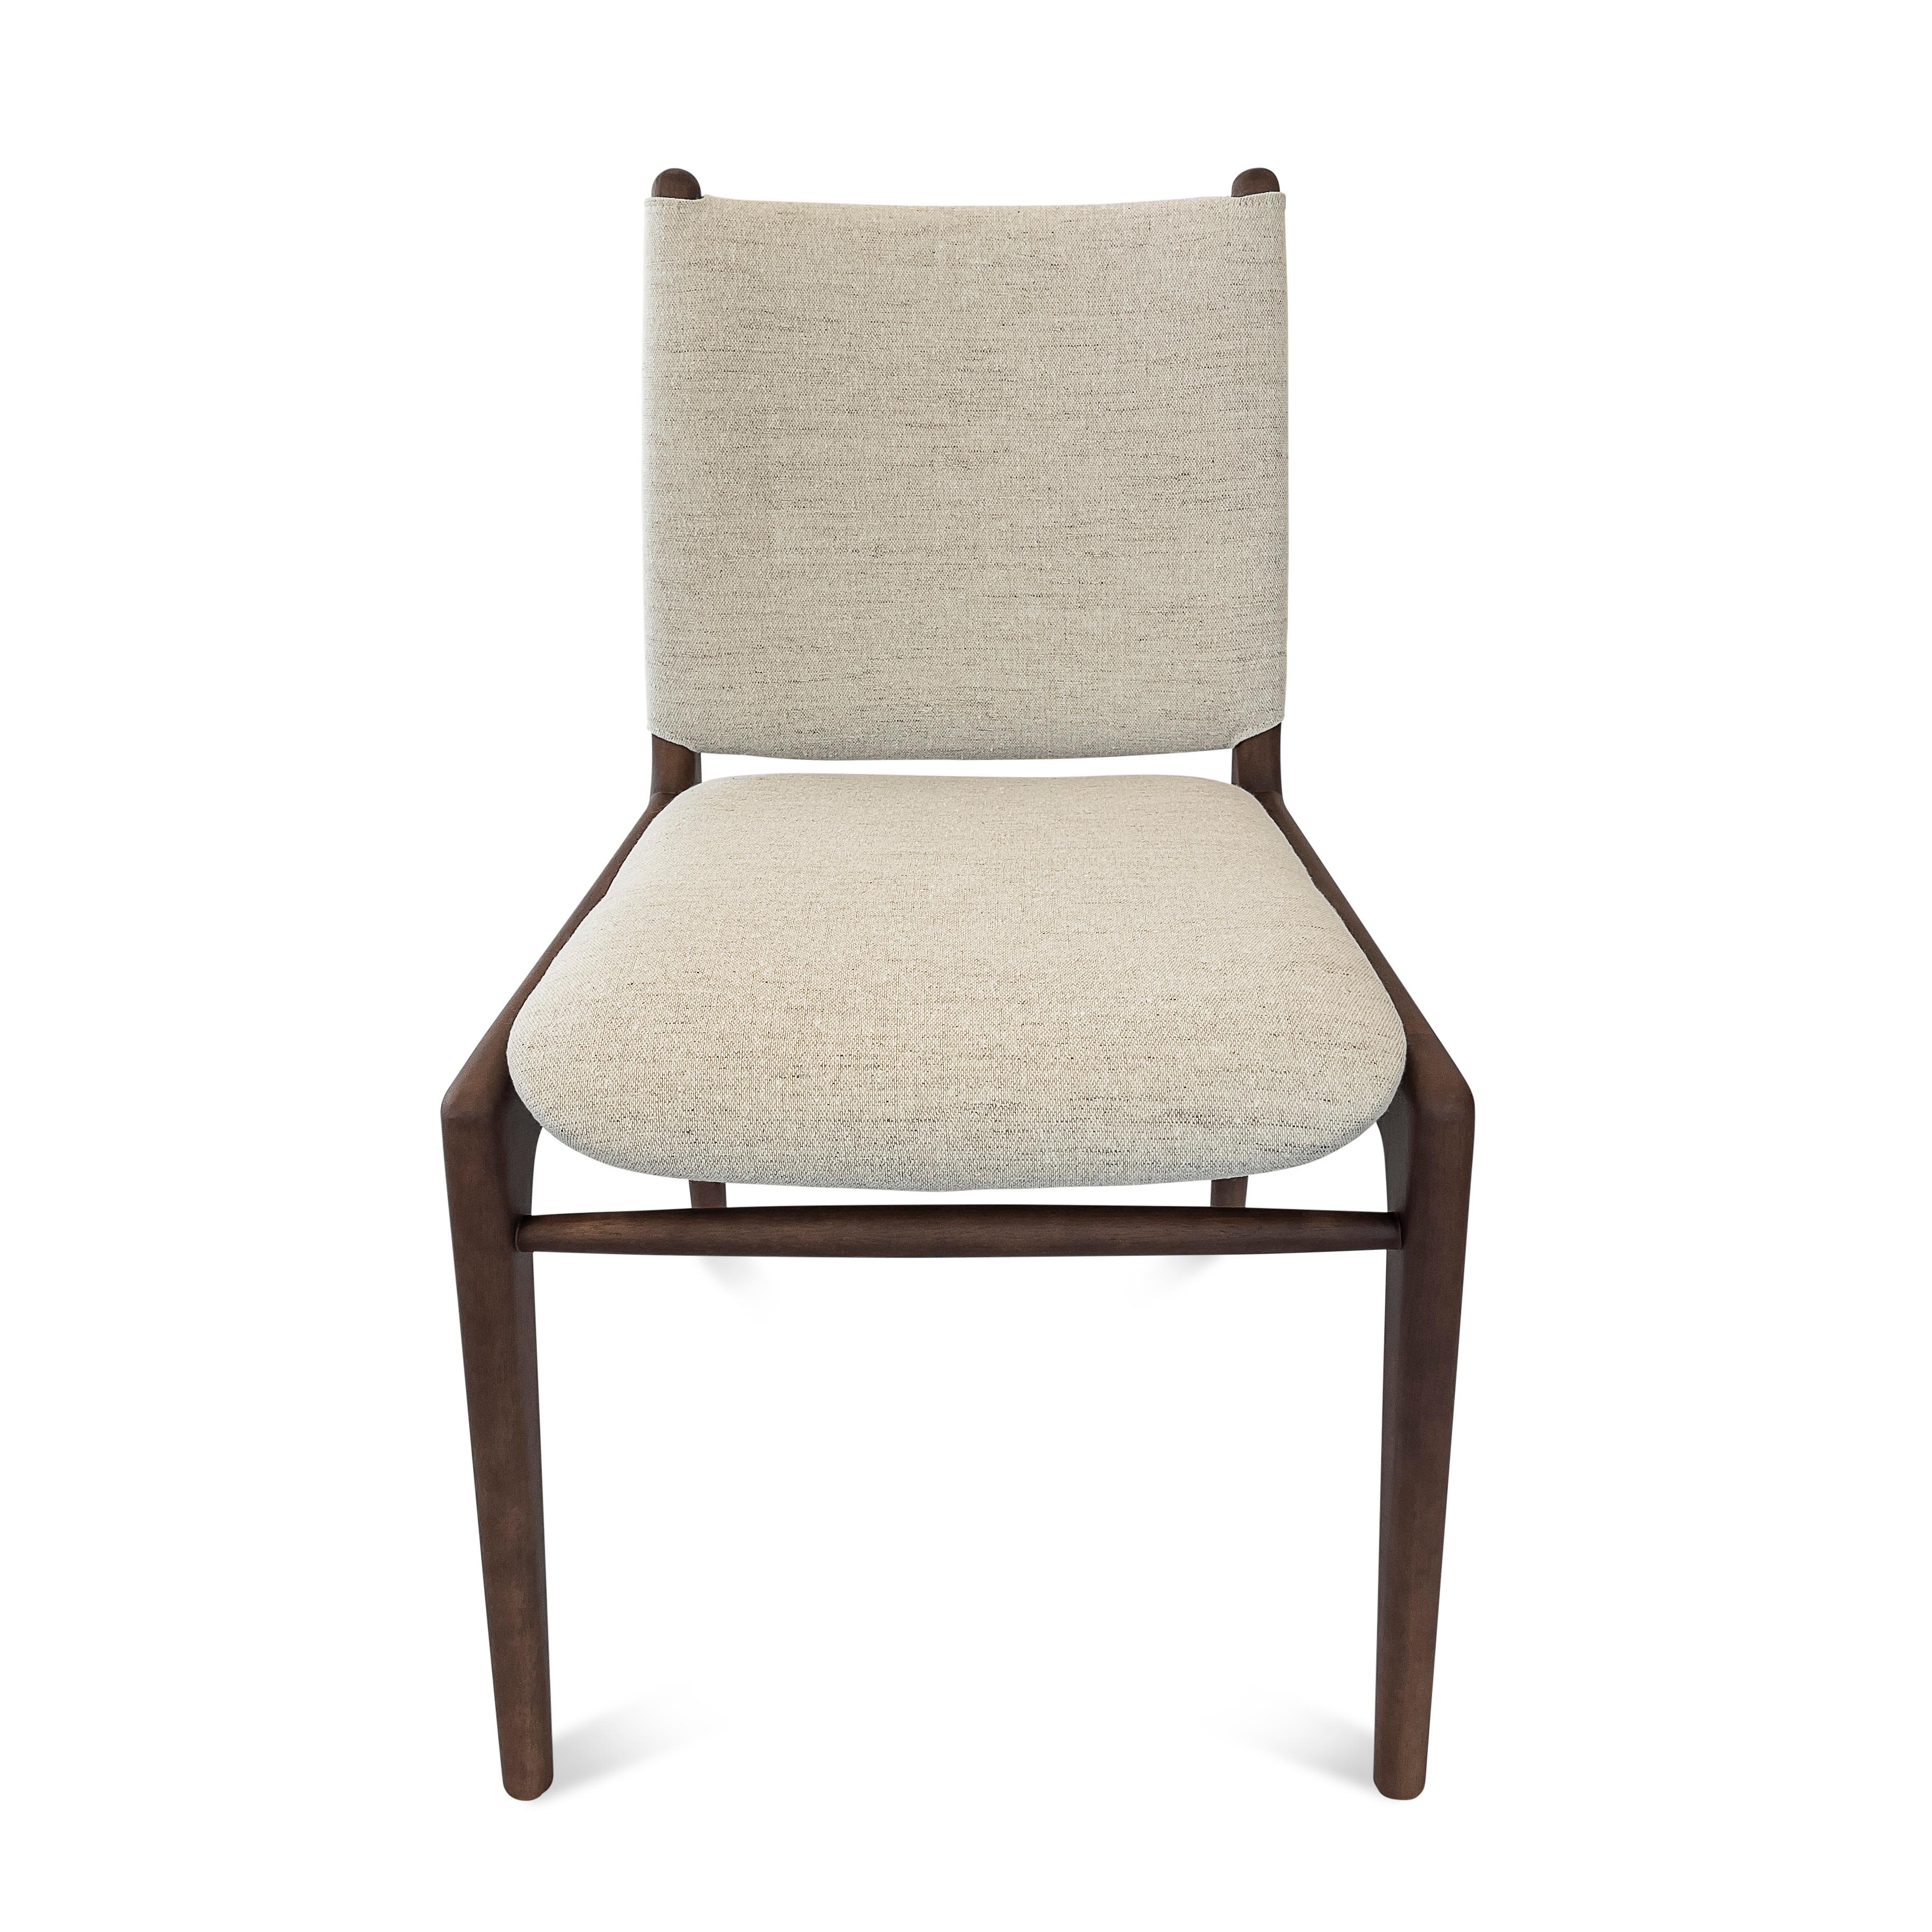 The Cappio chair highlights our beautiful walnut wood finish combined with a stunning beige fabric, this chair features a unique buckle design on the back of the seat. Our team at Uultis has designed this simple but elegant design that will